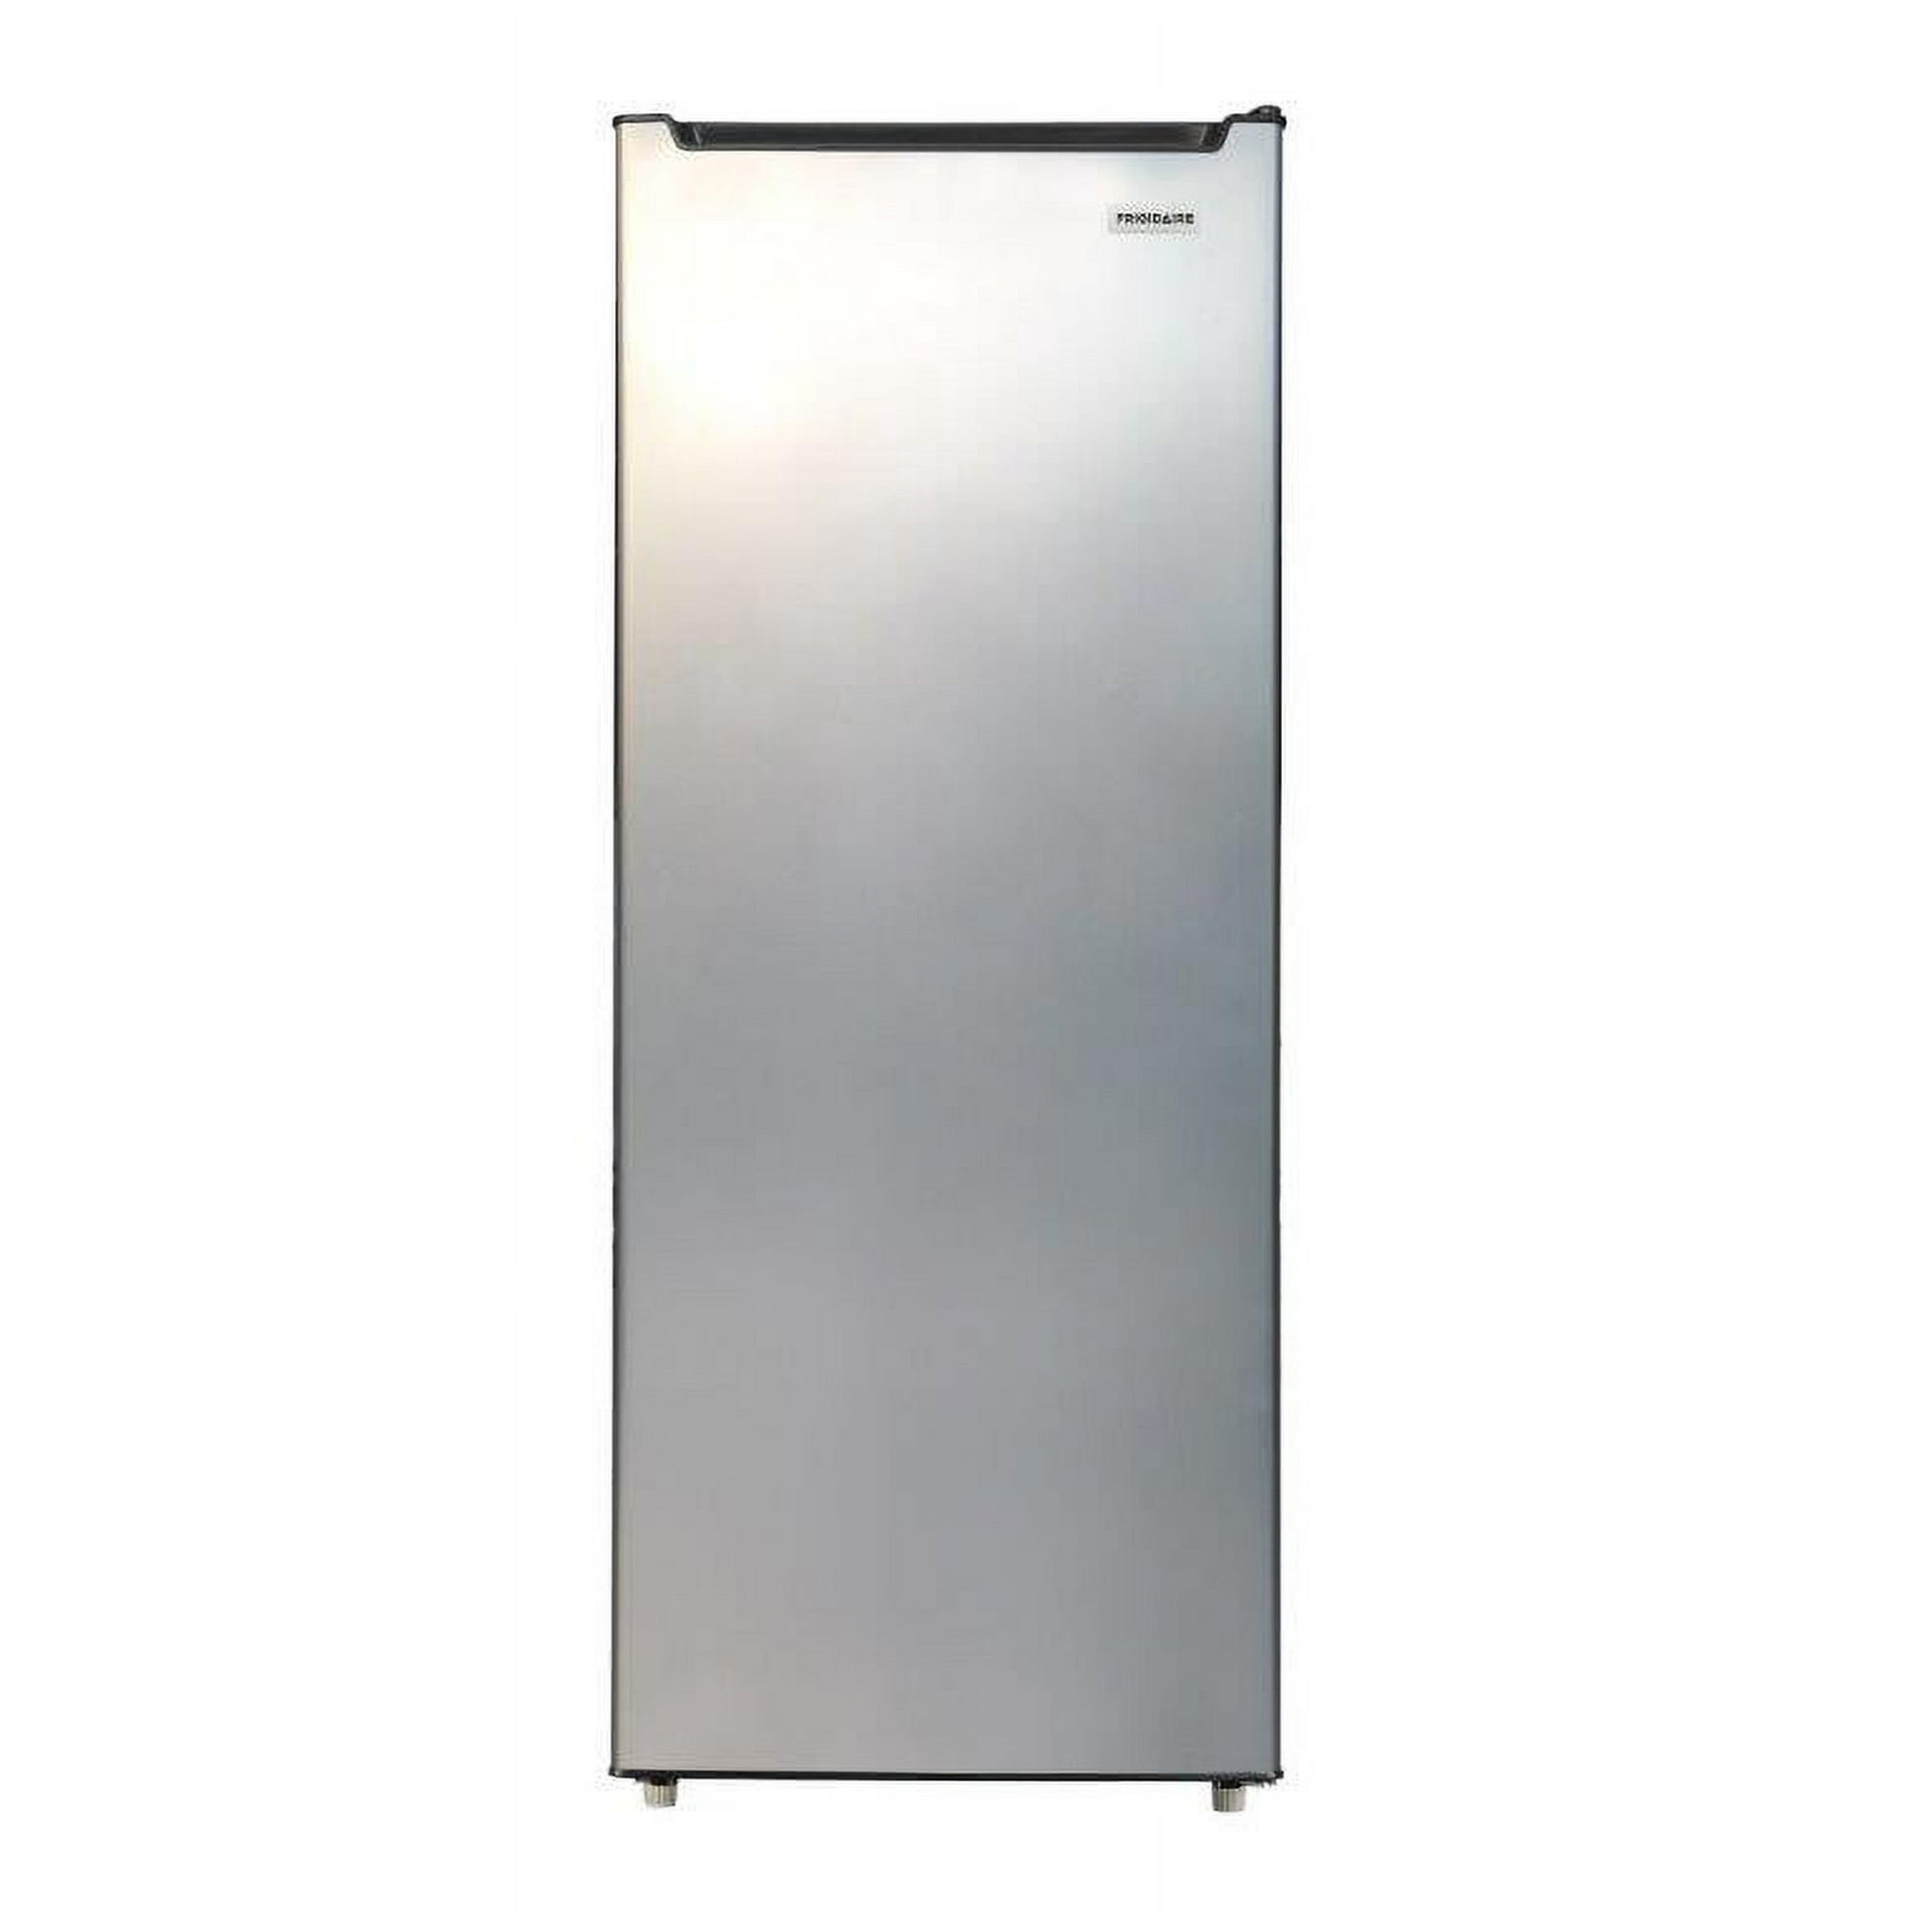 Frigidaire 6.5 cu. ft. Upright Freezer with VCM Stainless Steel Finish